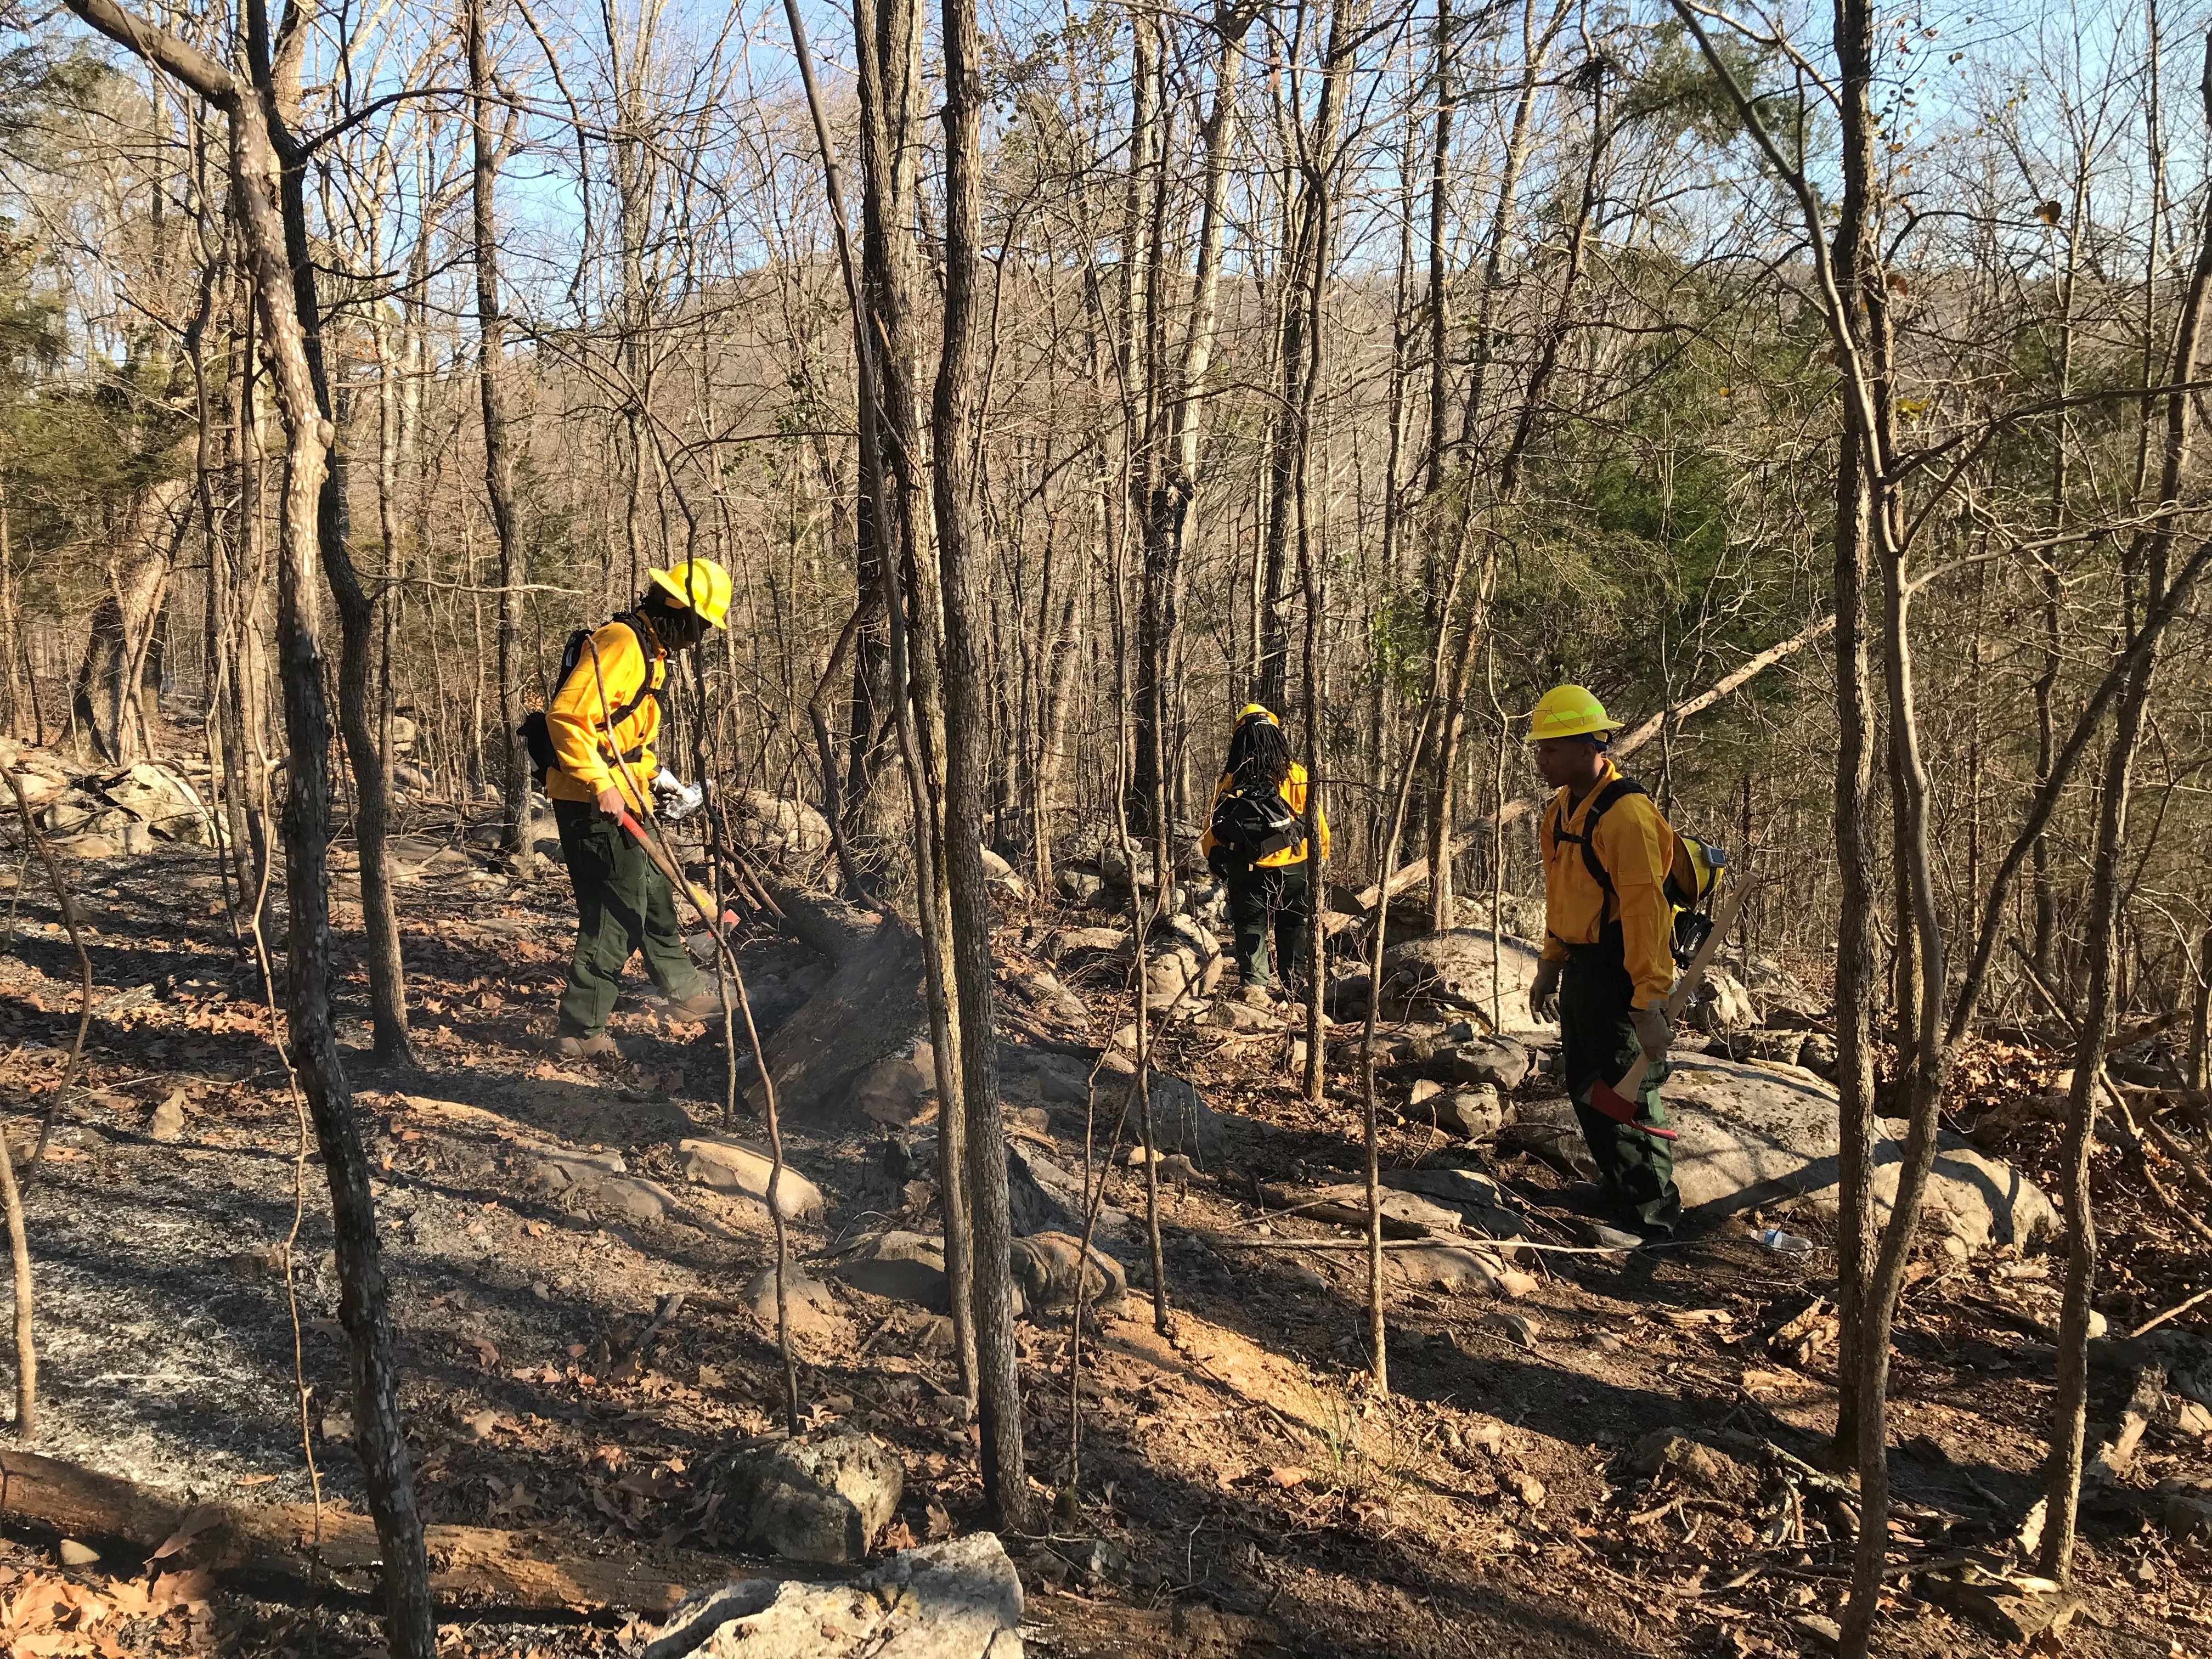 Alabama A&M University students helped the Alabama Forestry Commission patrol the fire edge for remaining hot spots after a wildfire at Keel Mountain in northern Alabama. 